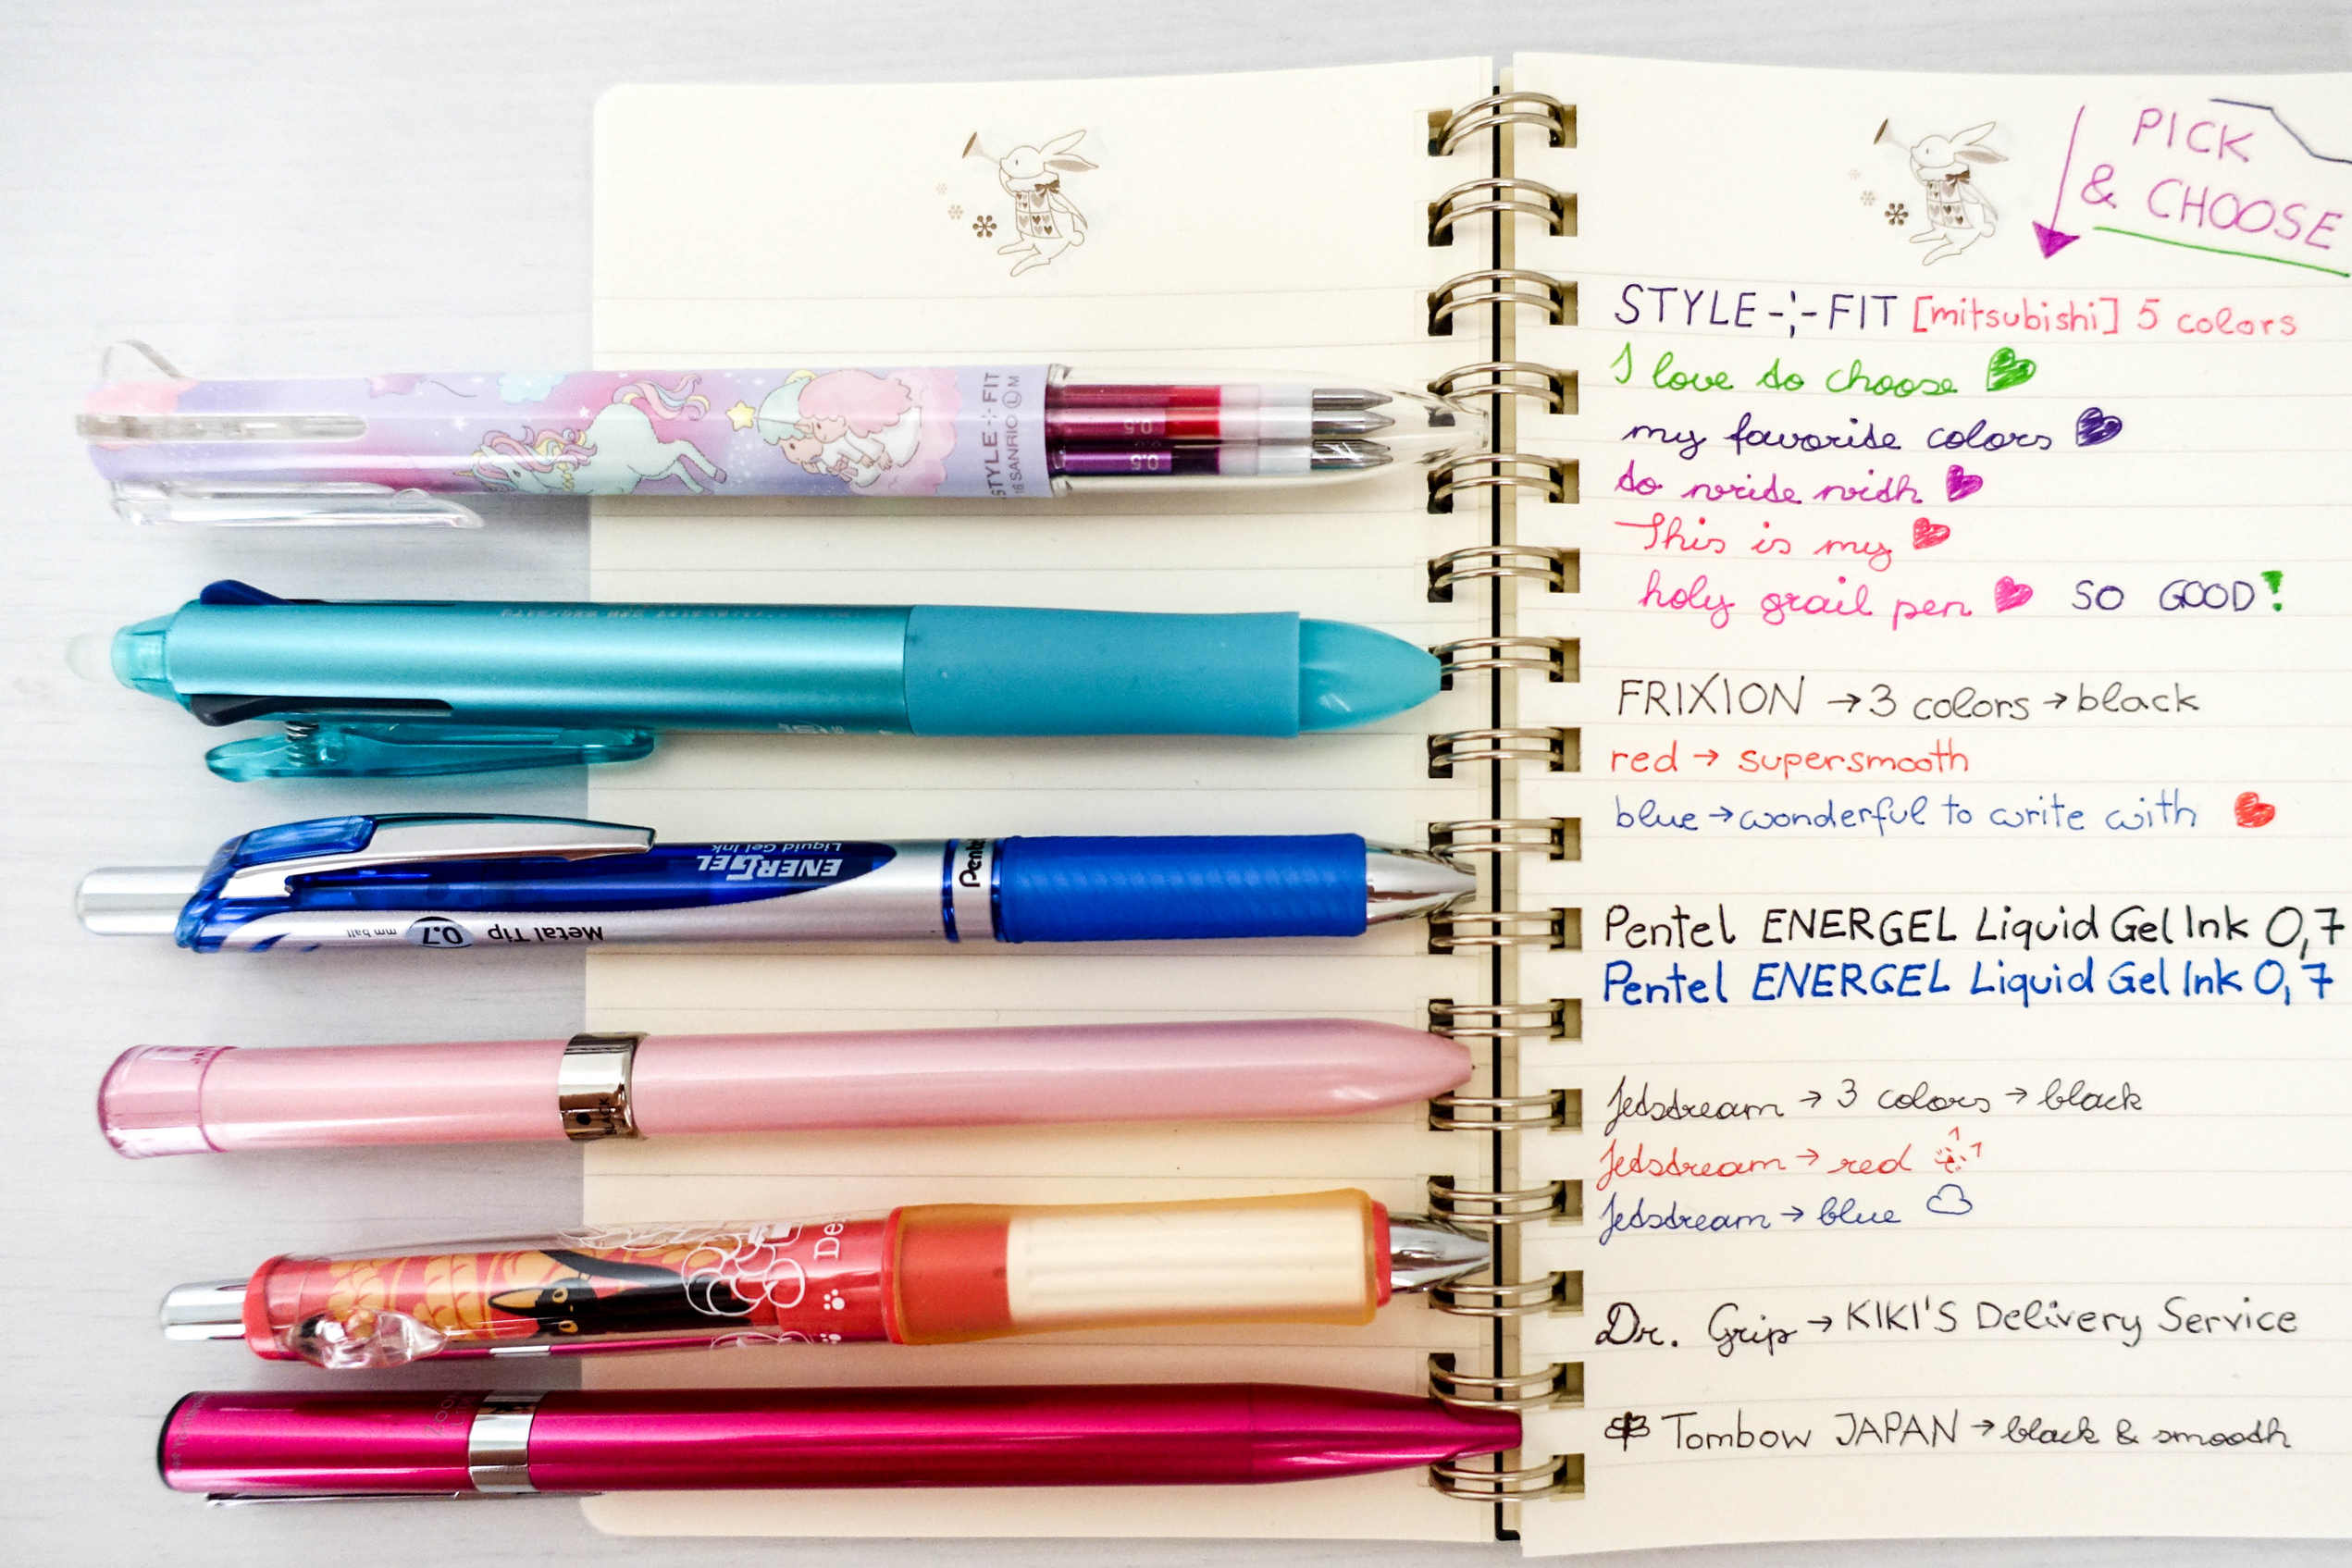 The Japan stationery haul, Part 1: The pens (and a few pencils